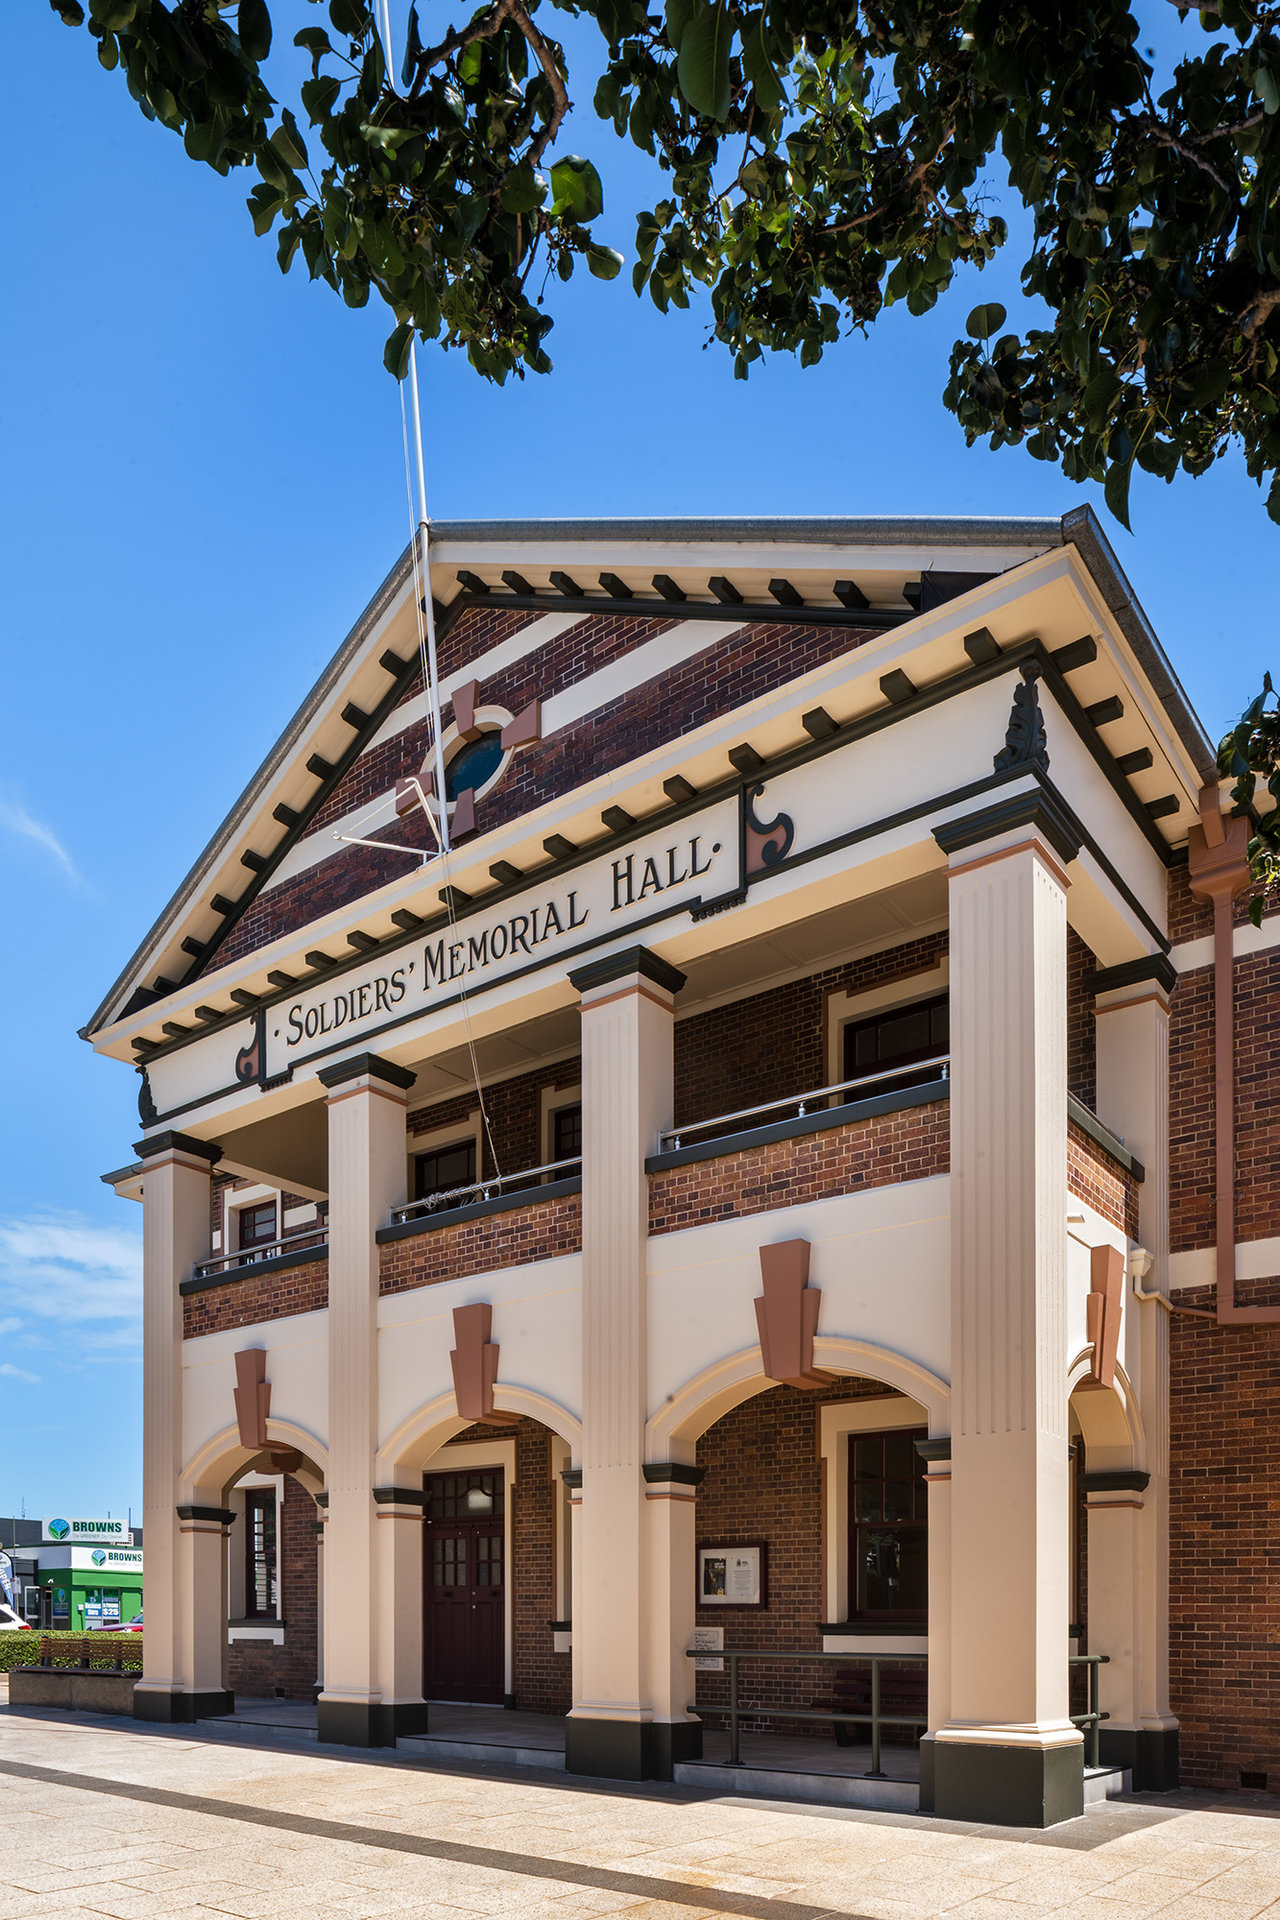 Soldiers Memorial Hall in Toowoomba